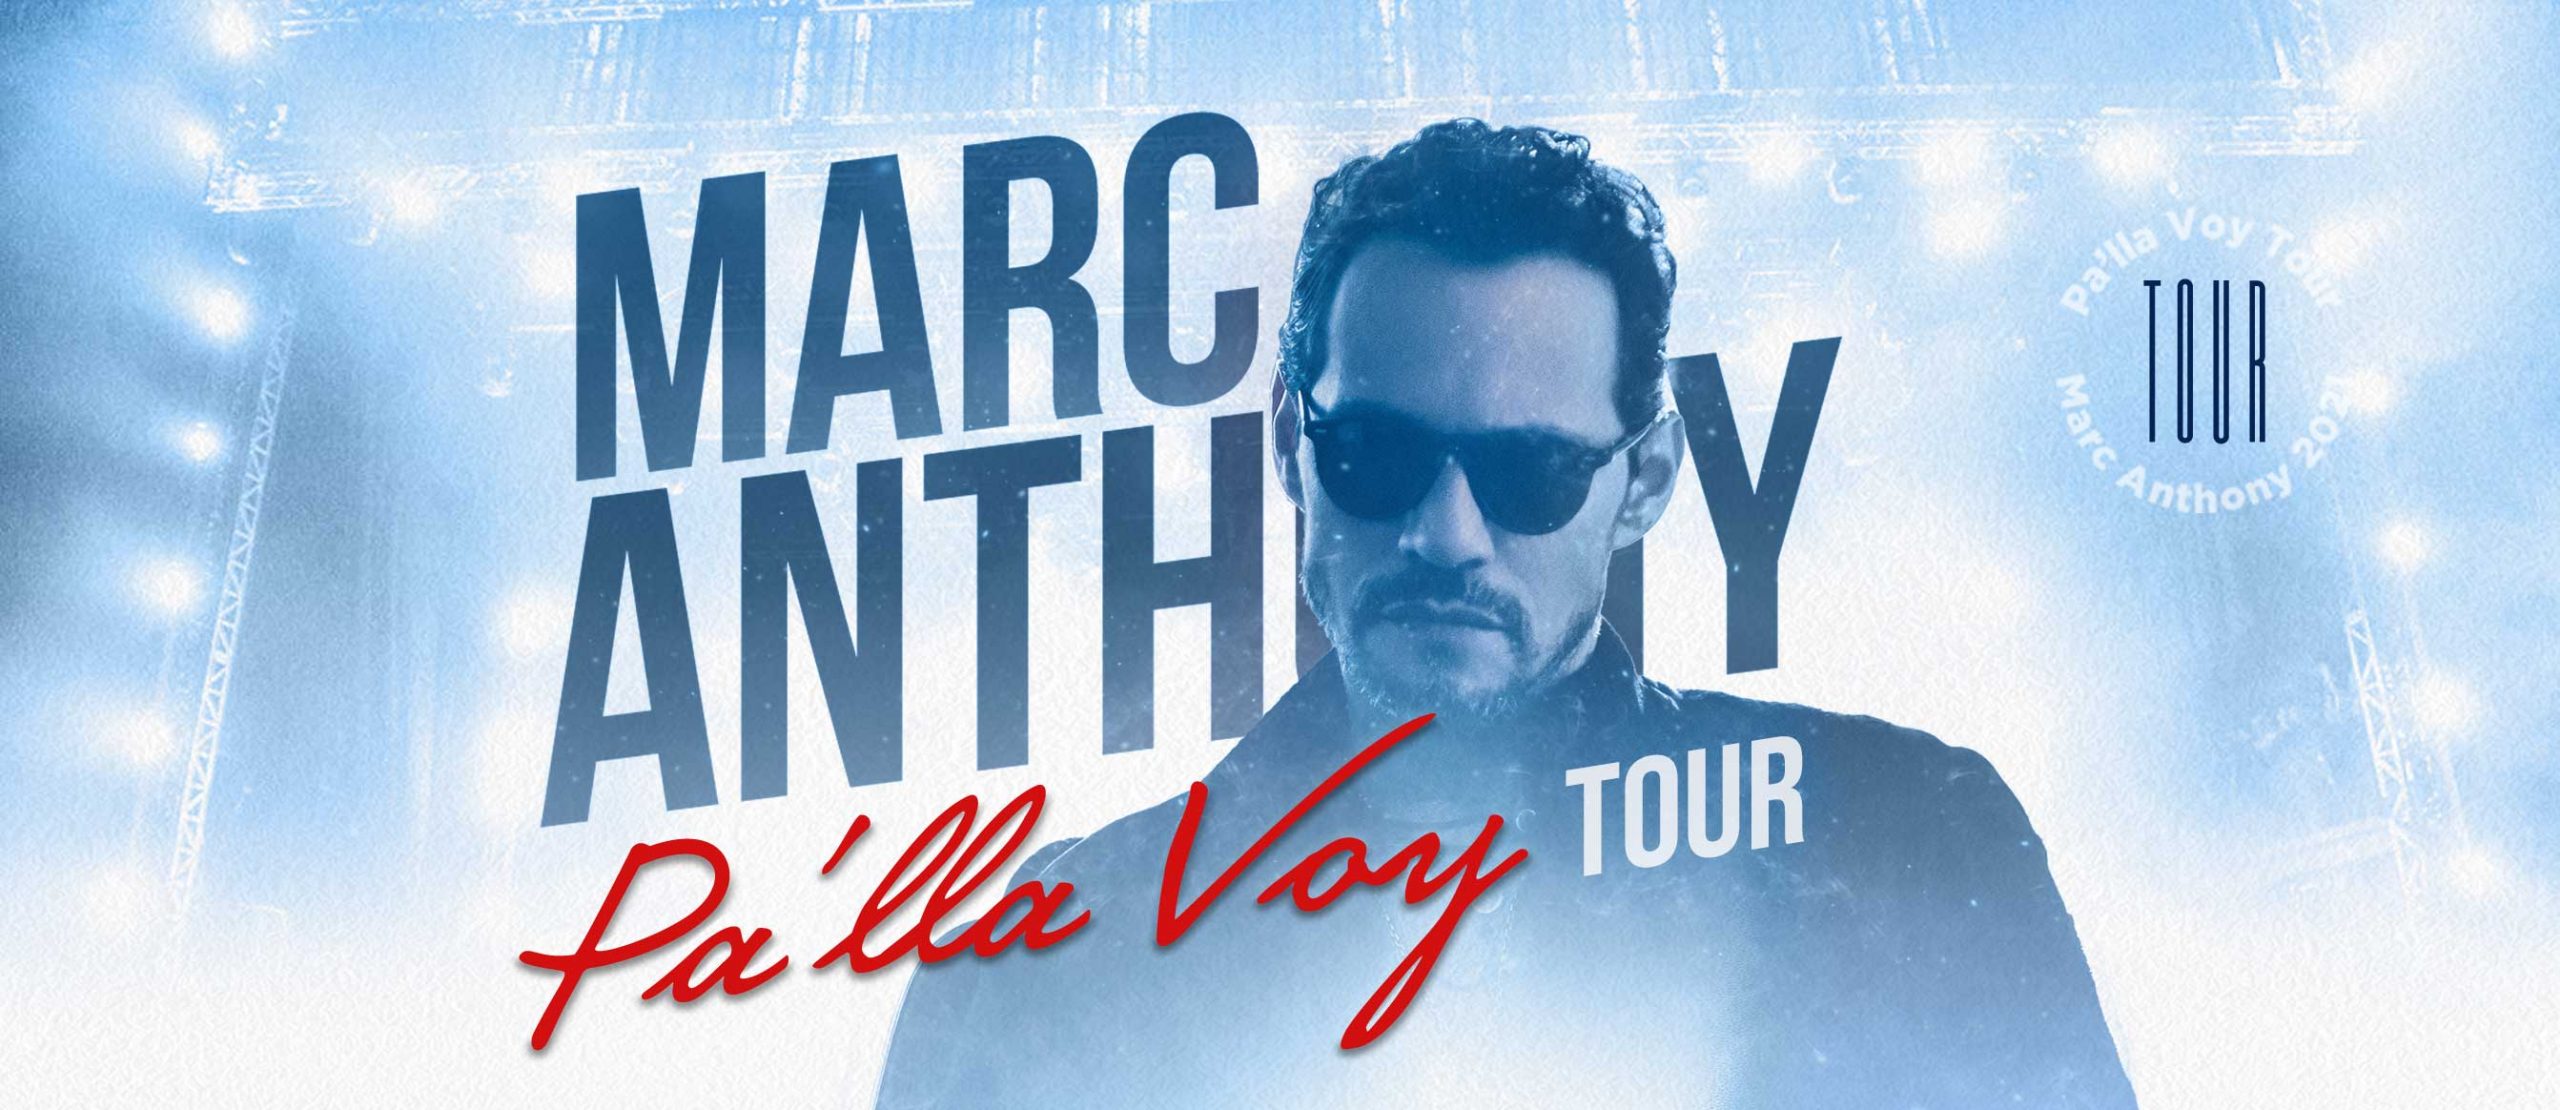 Marc Anthony Latin Music Artist Songs, Tour Dates, Videos & More